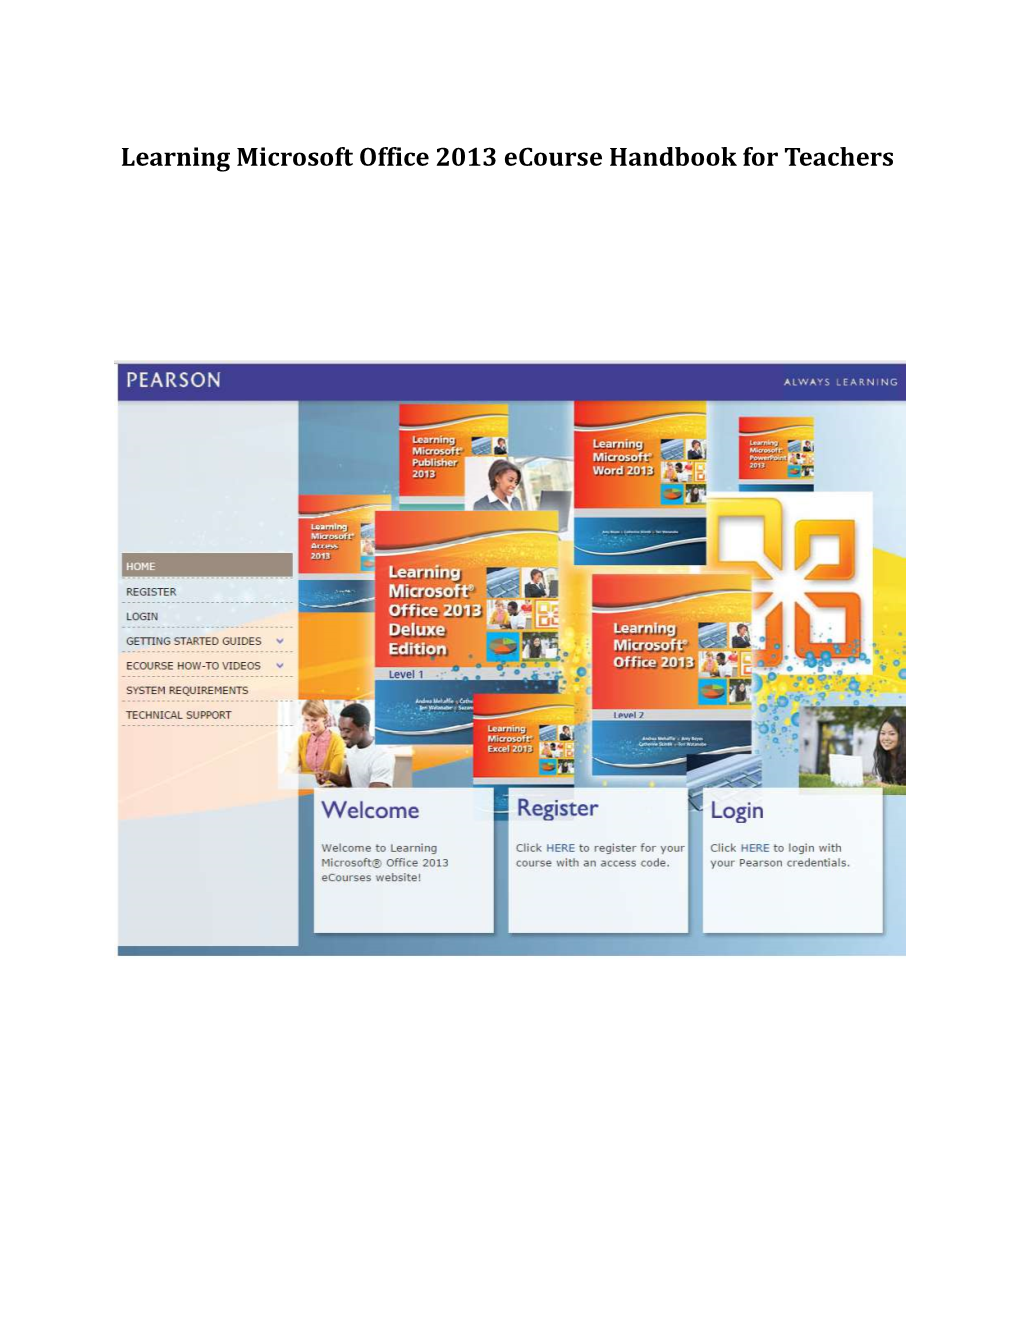 Learning Microsoft Office 2013 Ecourse Handbook for Teachers Getting Started Step 1: the First Step in Using the Ecourse Is Registering the Course Access Code